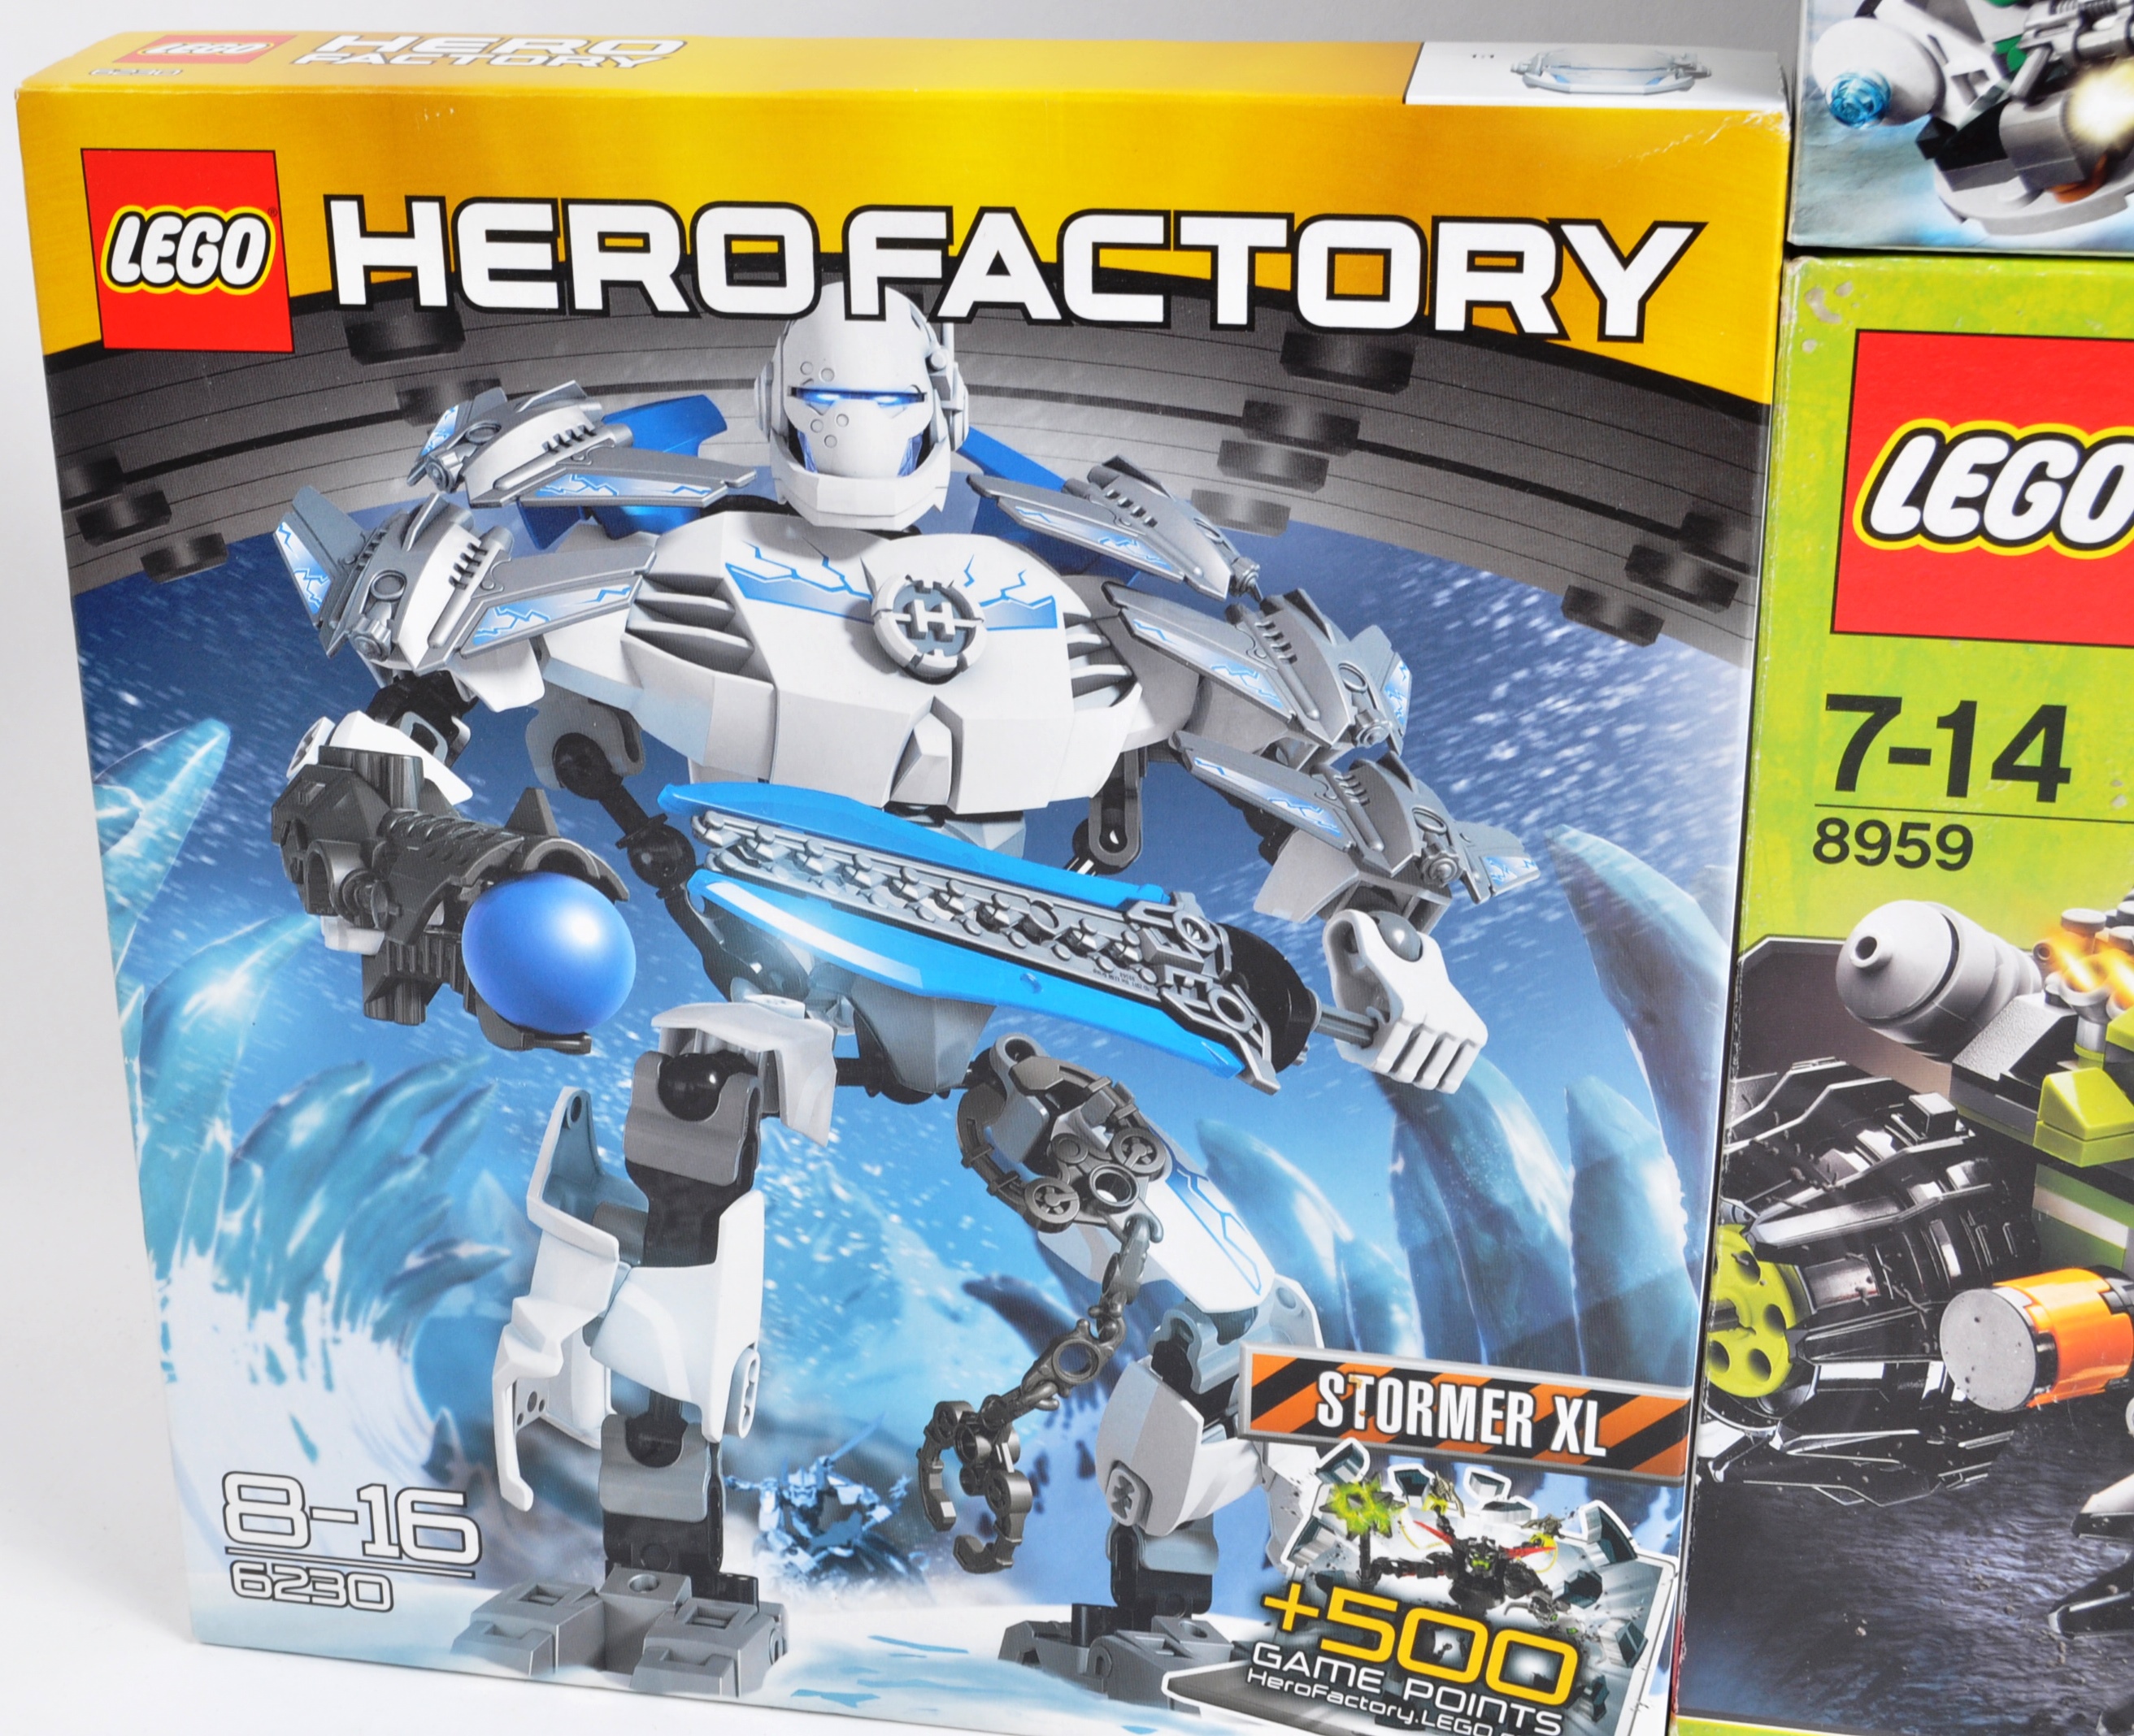 LEGO SETS - GALAXY SQUAD - HERO FACTORY - POWER MINERS - Image 4 of 6